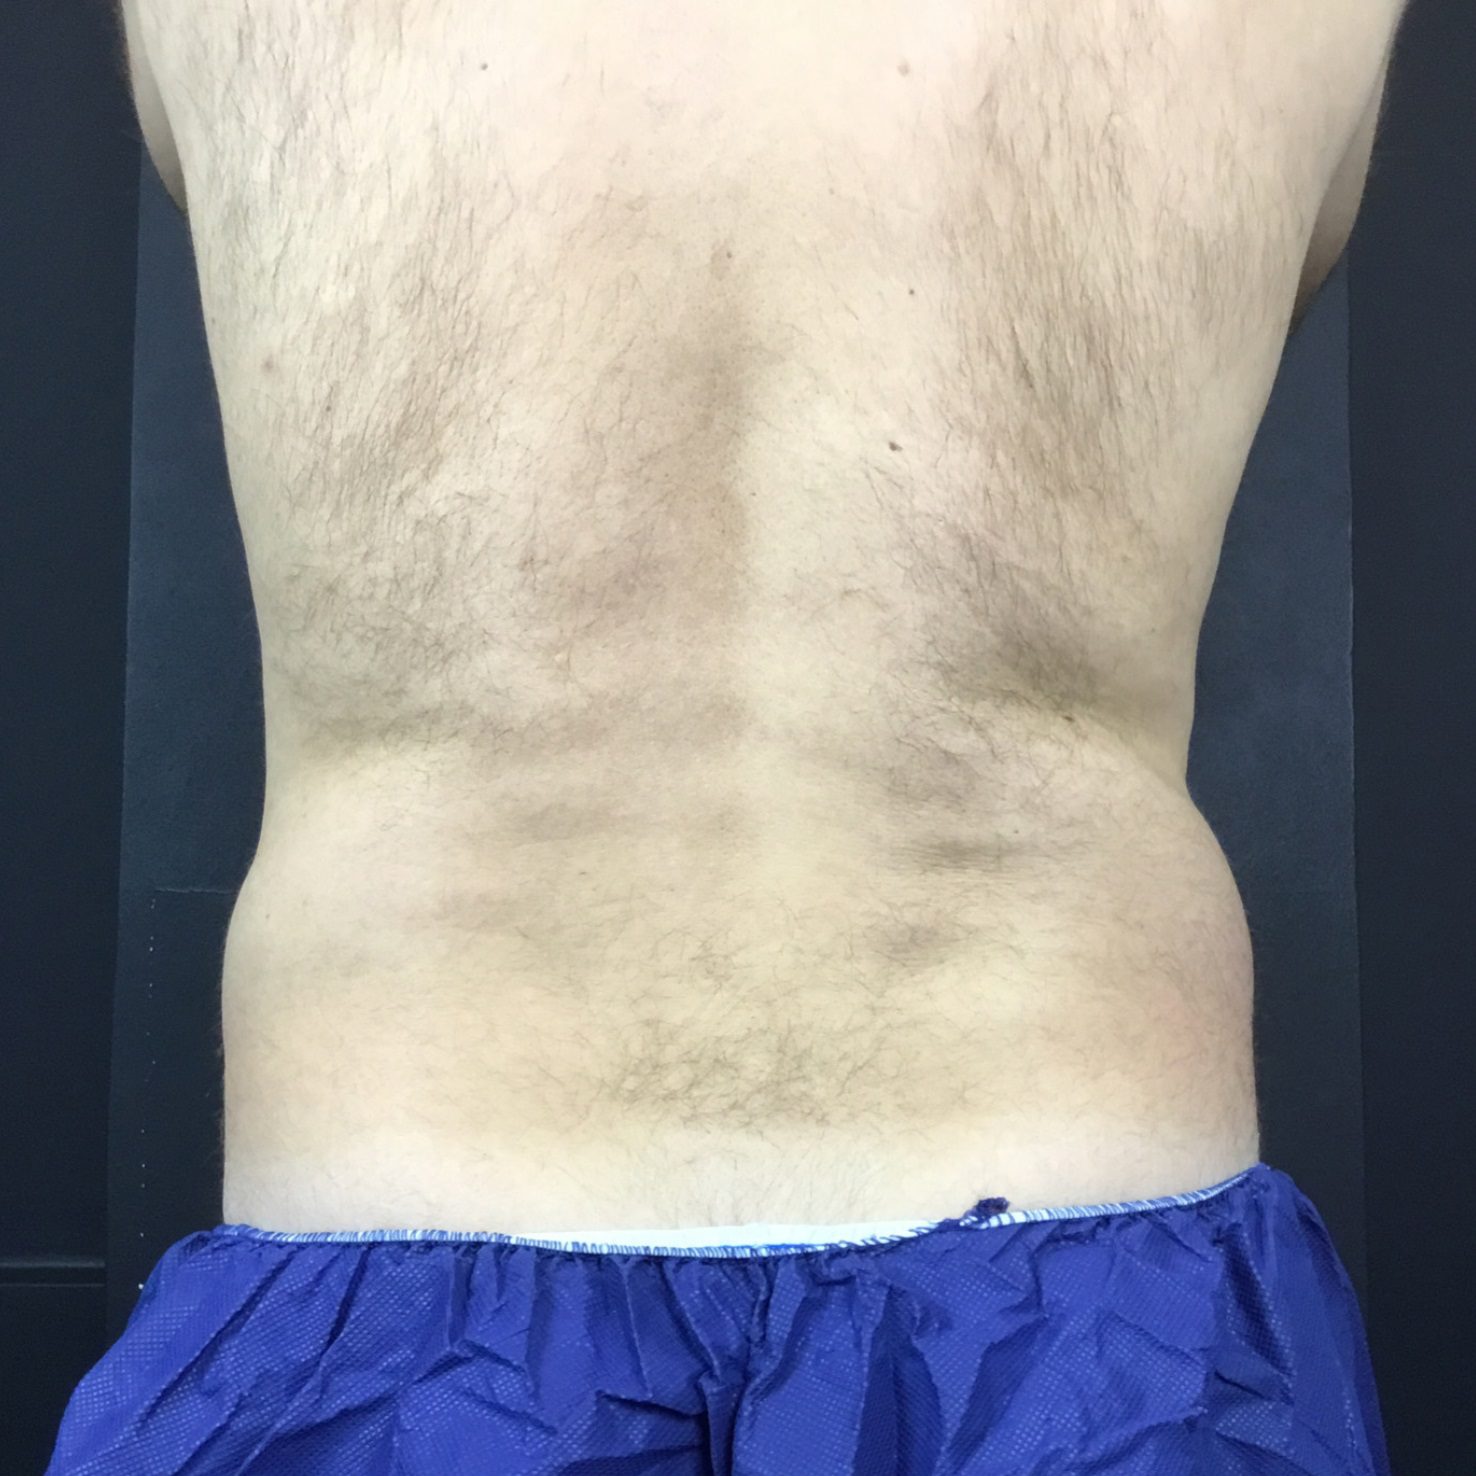 coolsculpting fat freezing muffin top, flanks before